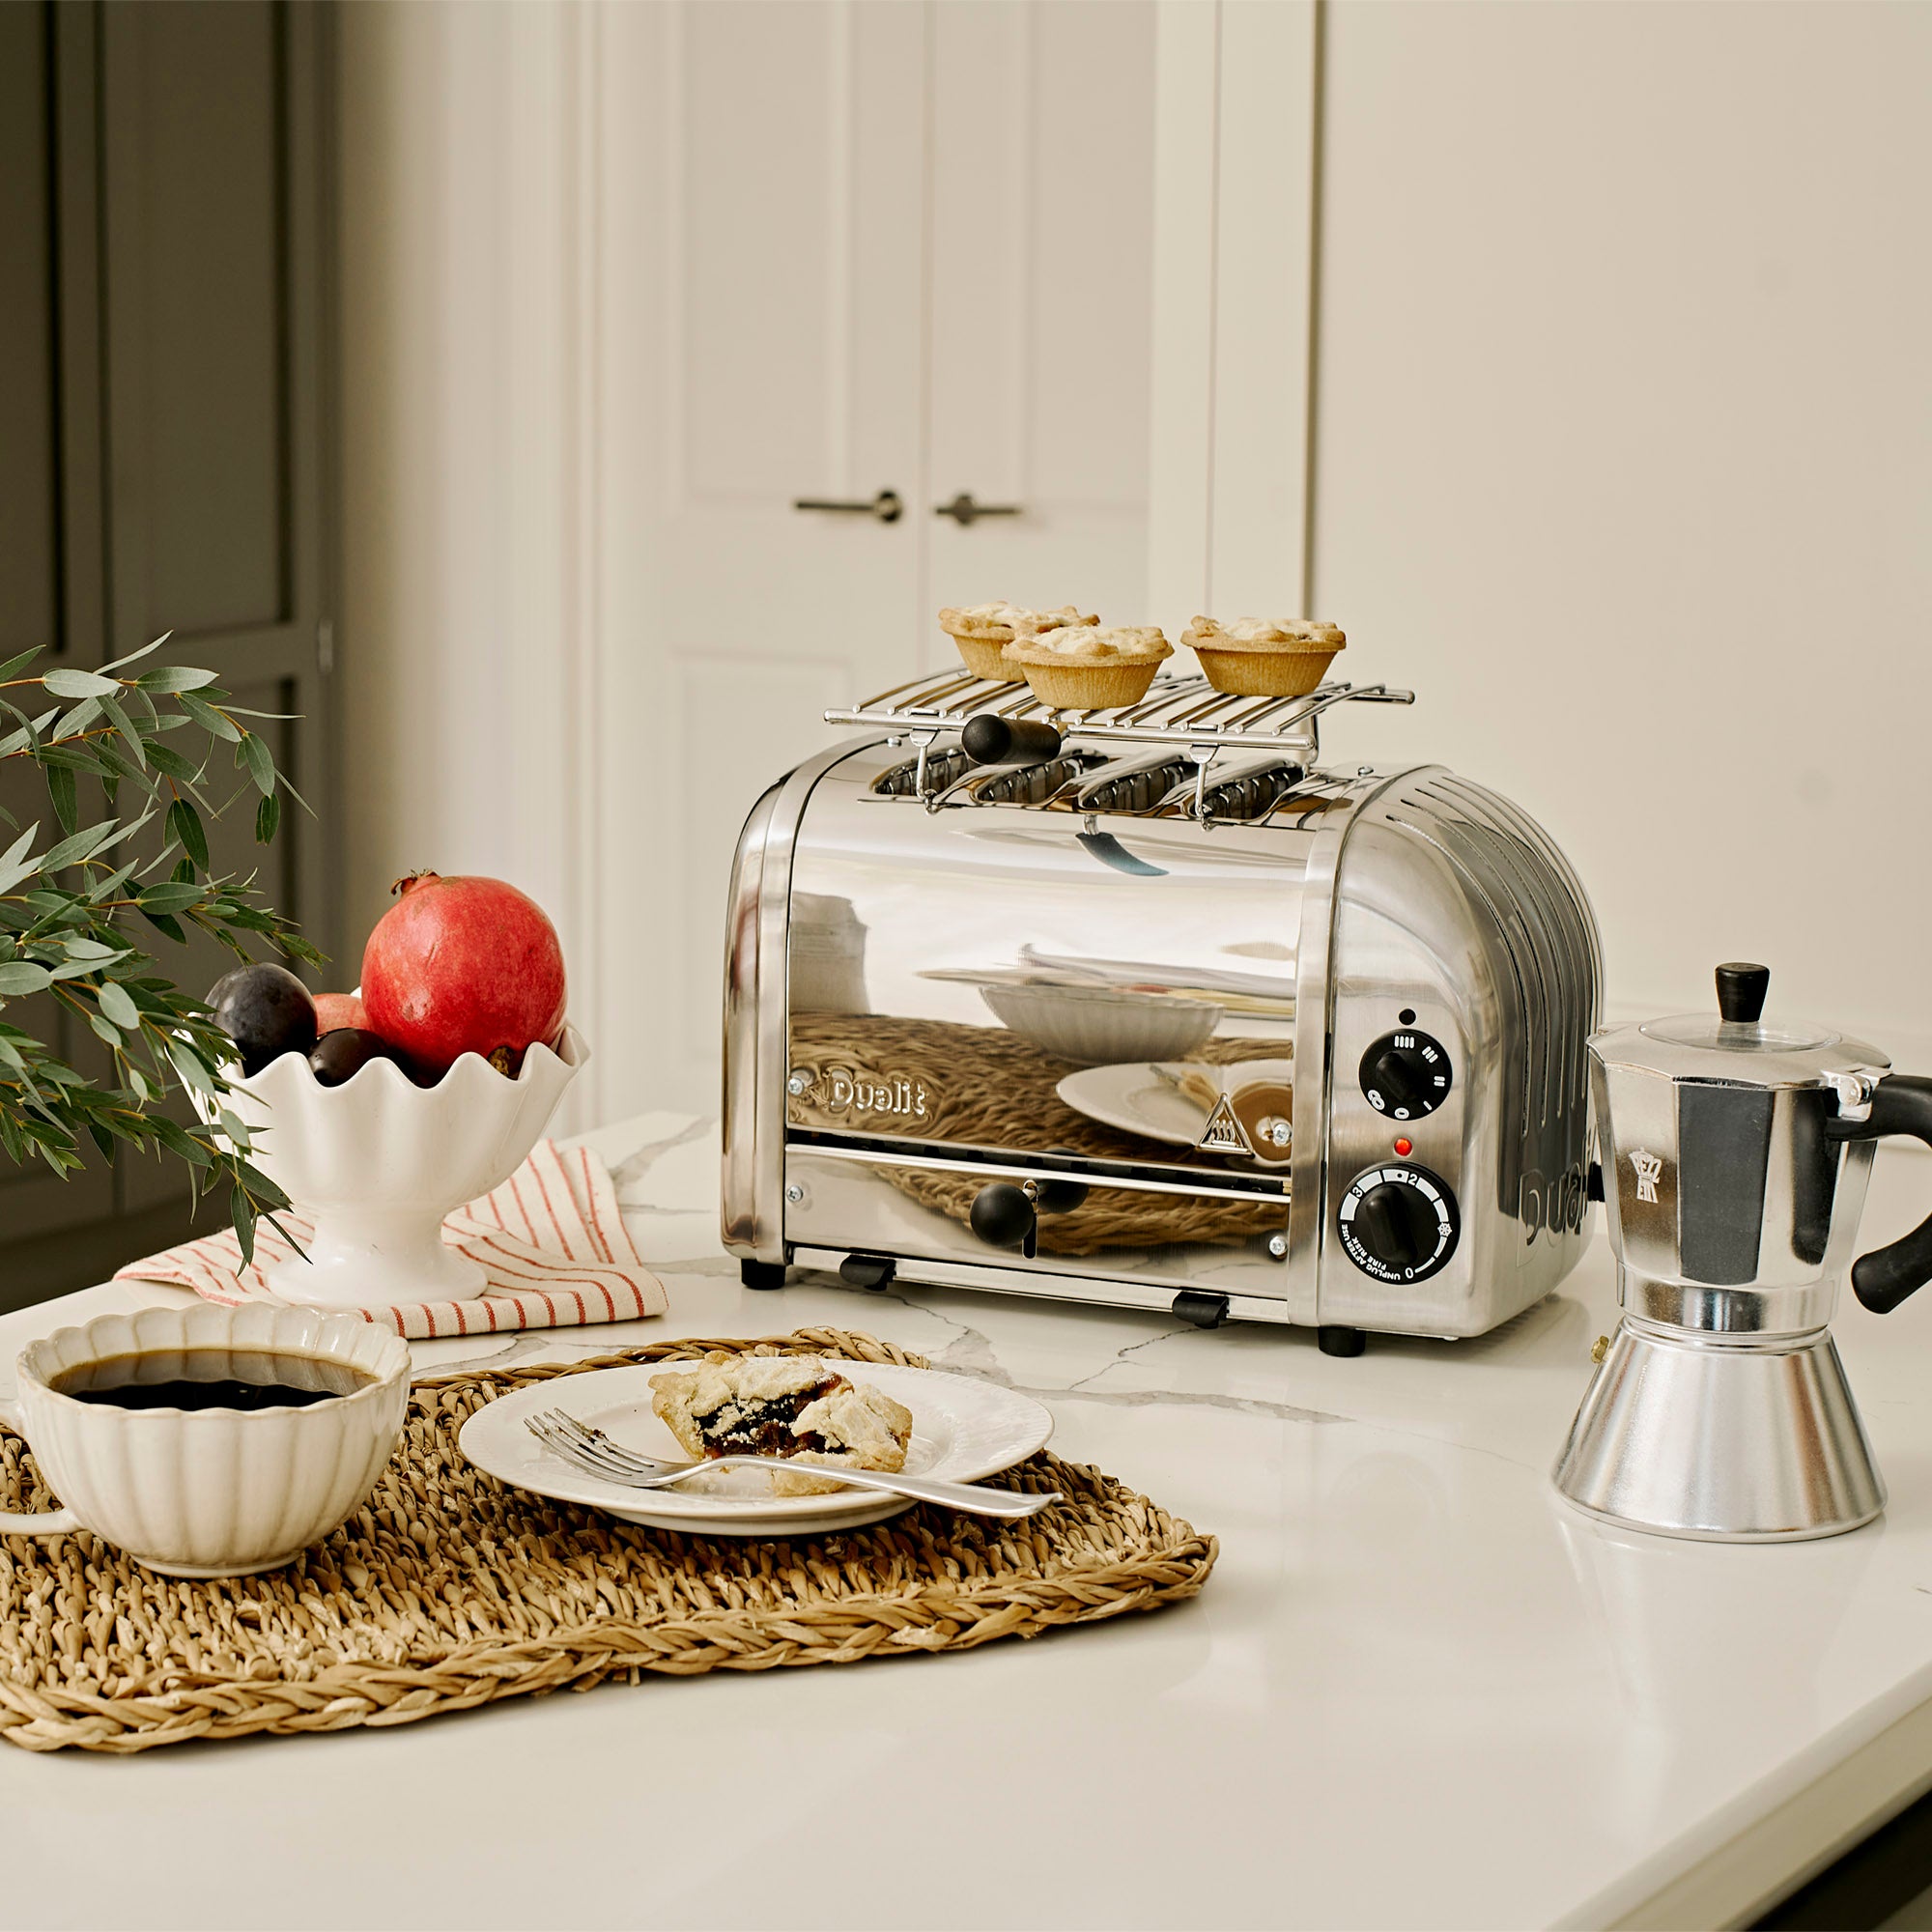 You Can Now Get a Toaster With a Warming Rack For Warming Up Your